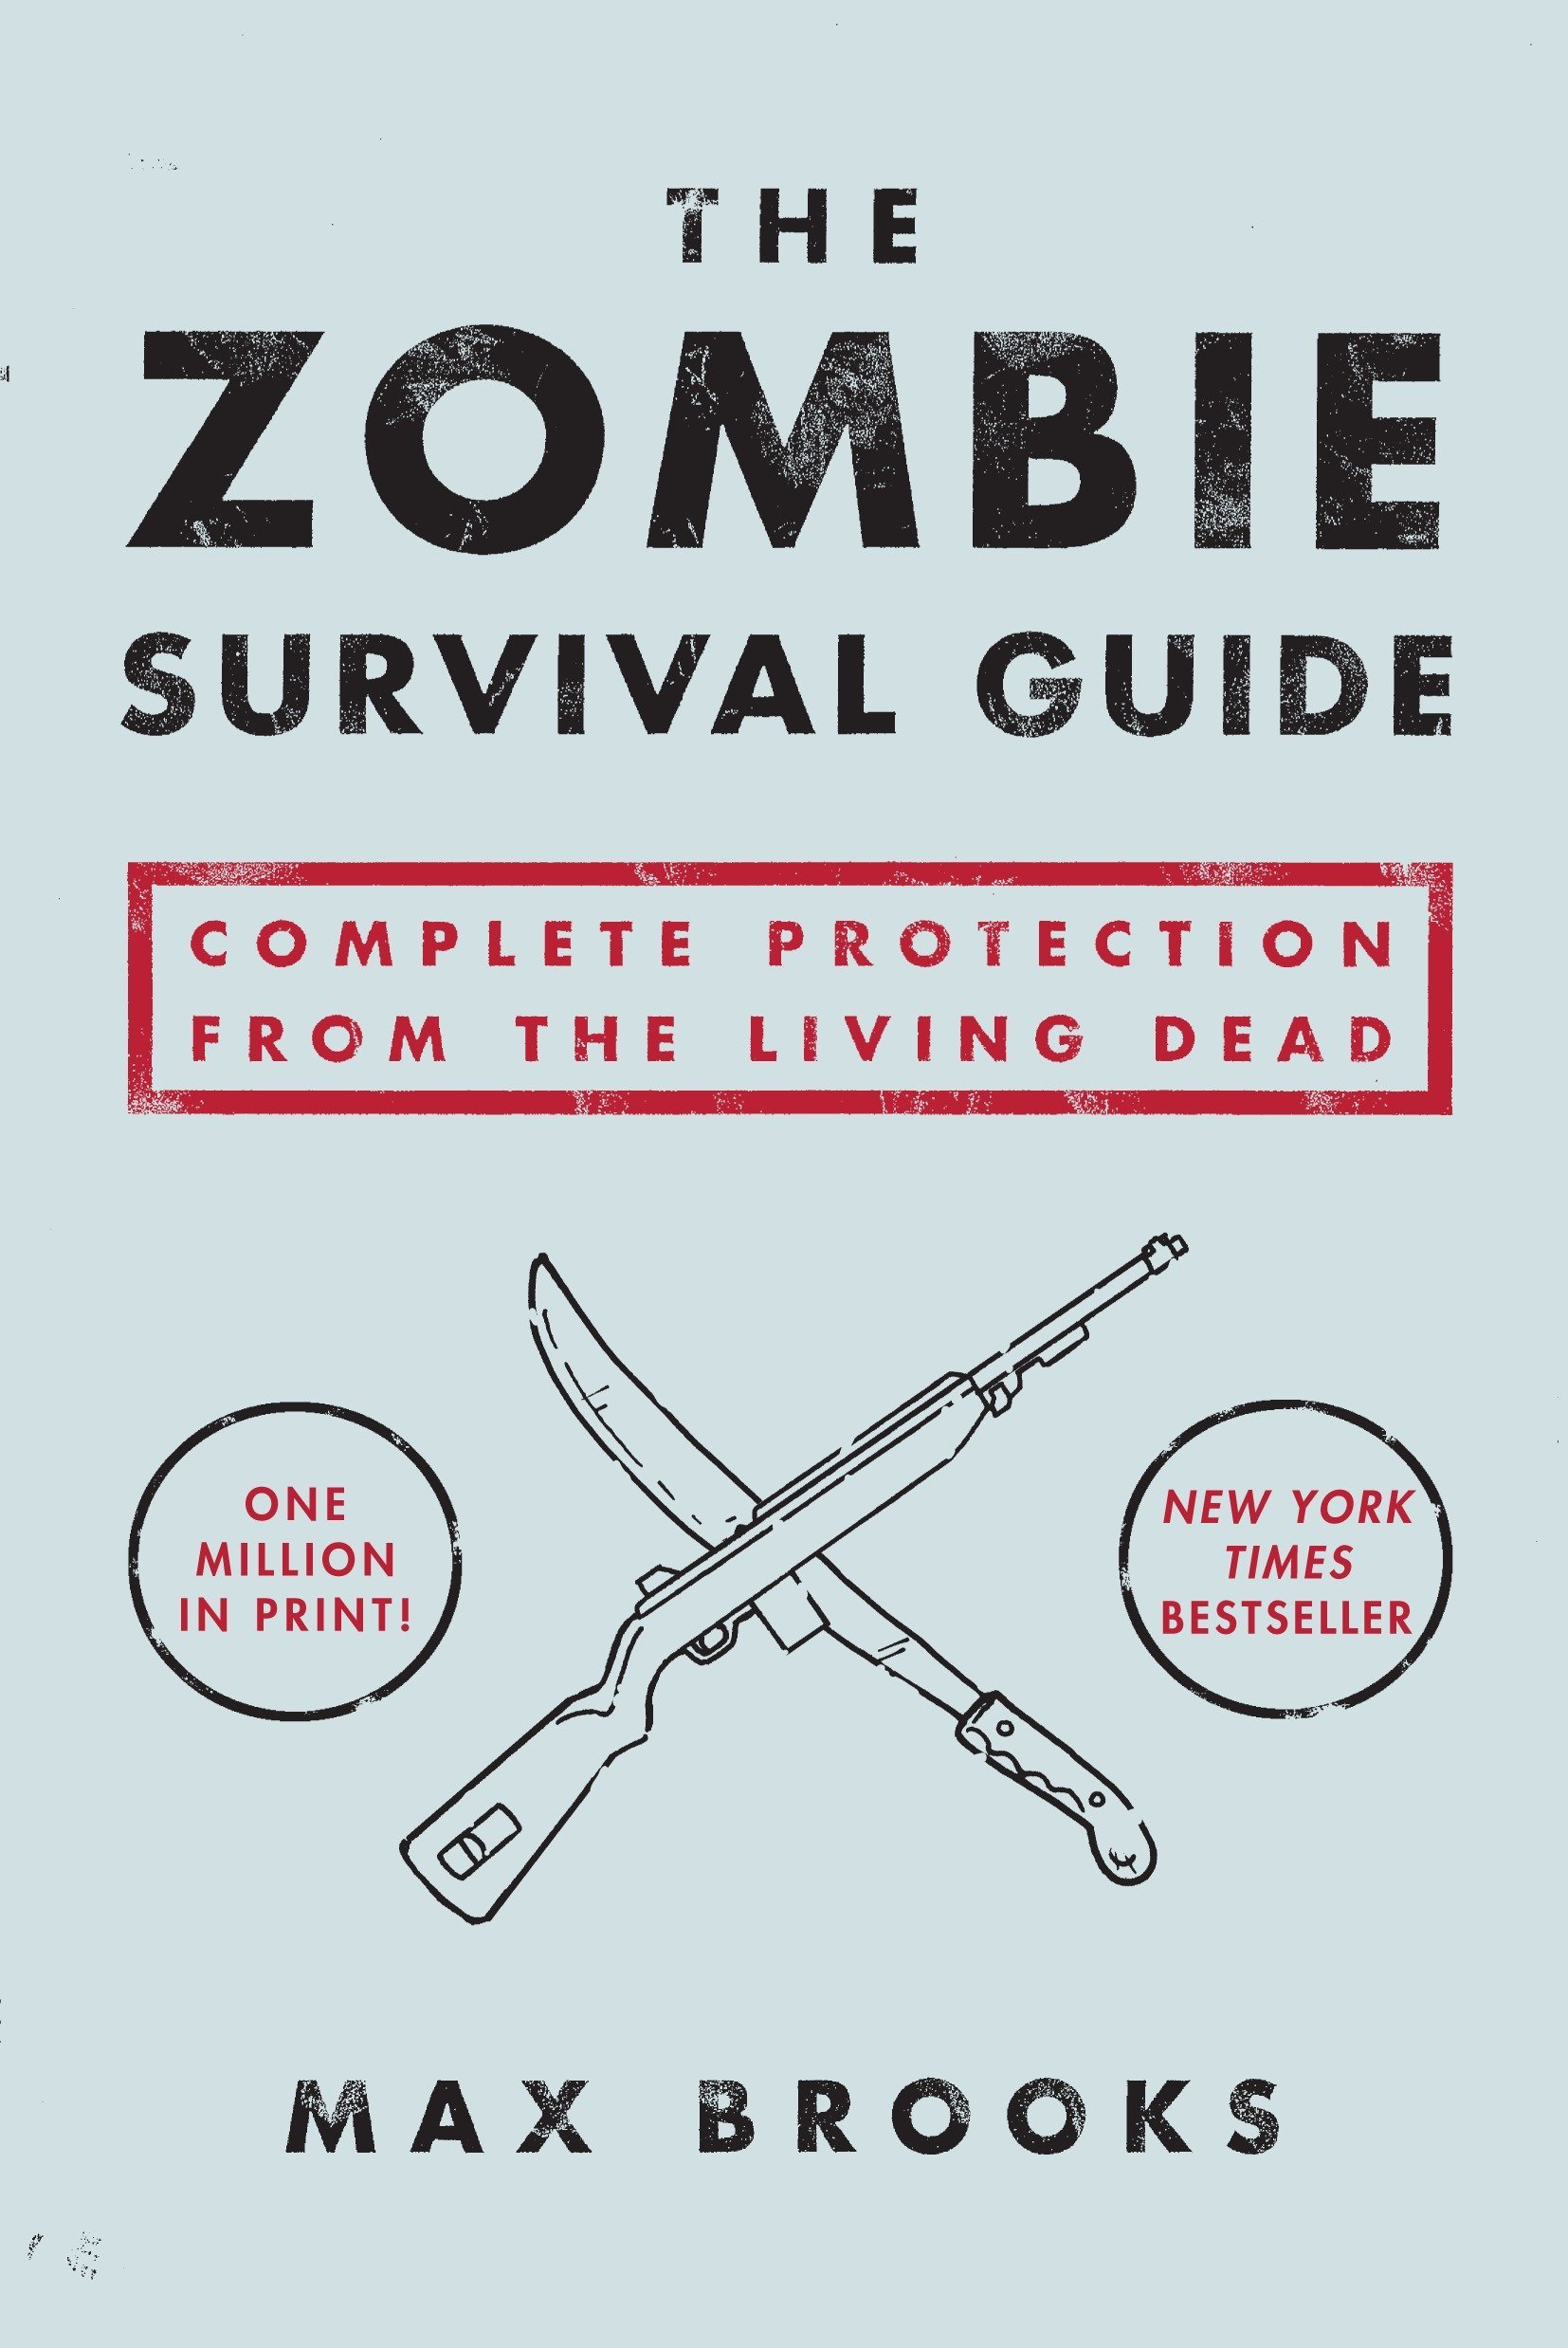 Project Zomboid Zombie Lore Settings from Games-Movies & Show - Brooks Zombies (Zombie Survival Guide) - 7022856